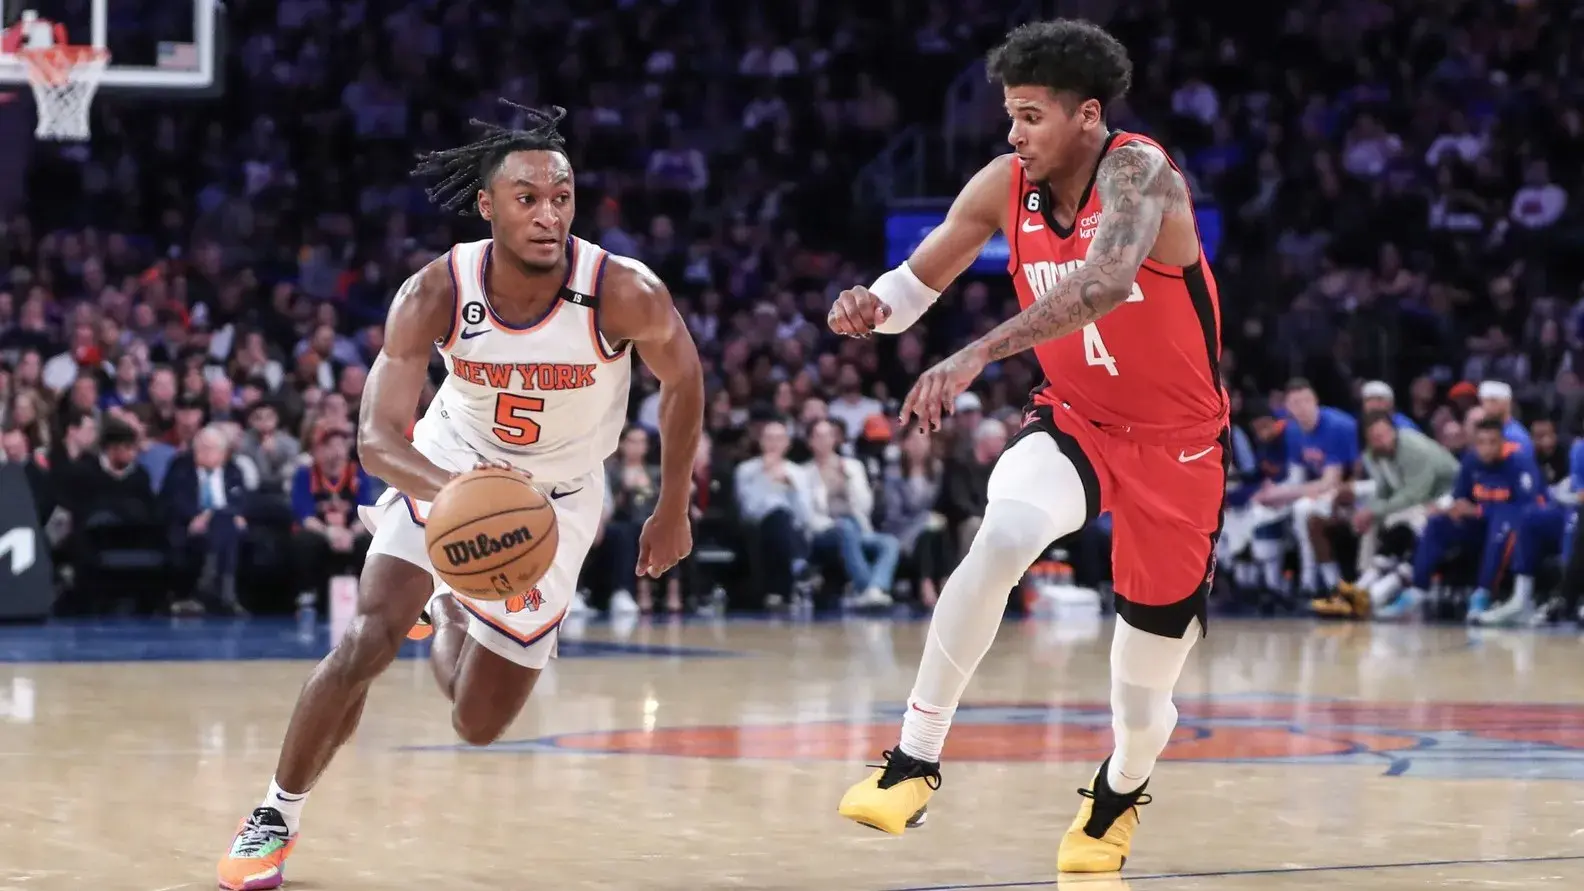 New York Knicks guard Immanuel Quickley (5) looks to drive past Houston Rockets guard Jalen Green (4) in the third quarter at Madison Square Garden / Wendell Cruz-USA TODAY Sports